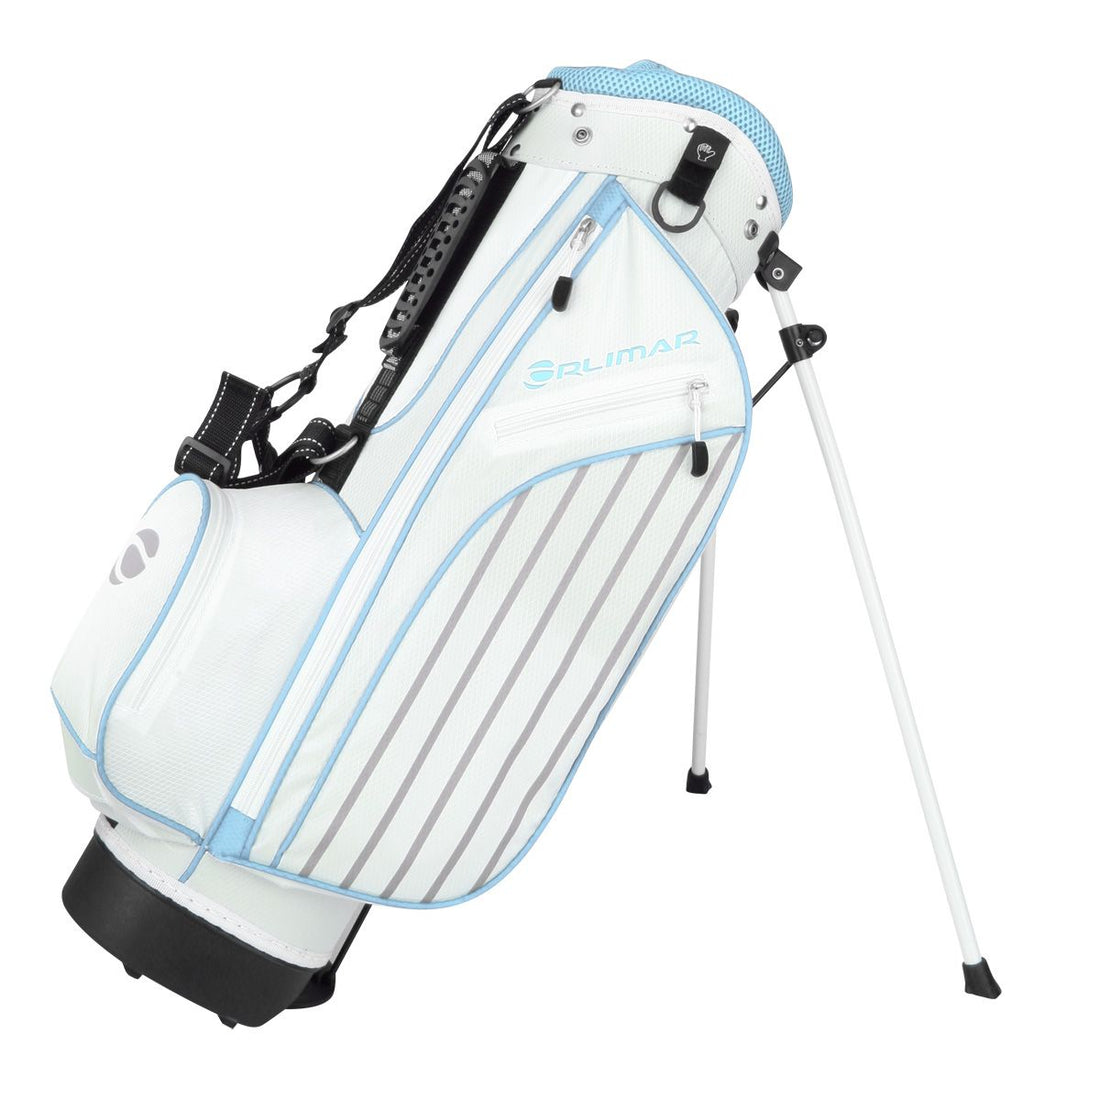 Orlimar ATS Junior Girls Sky Blue Series white golf stand bag with light blue and gray accent colors